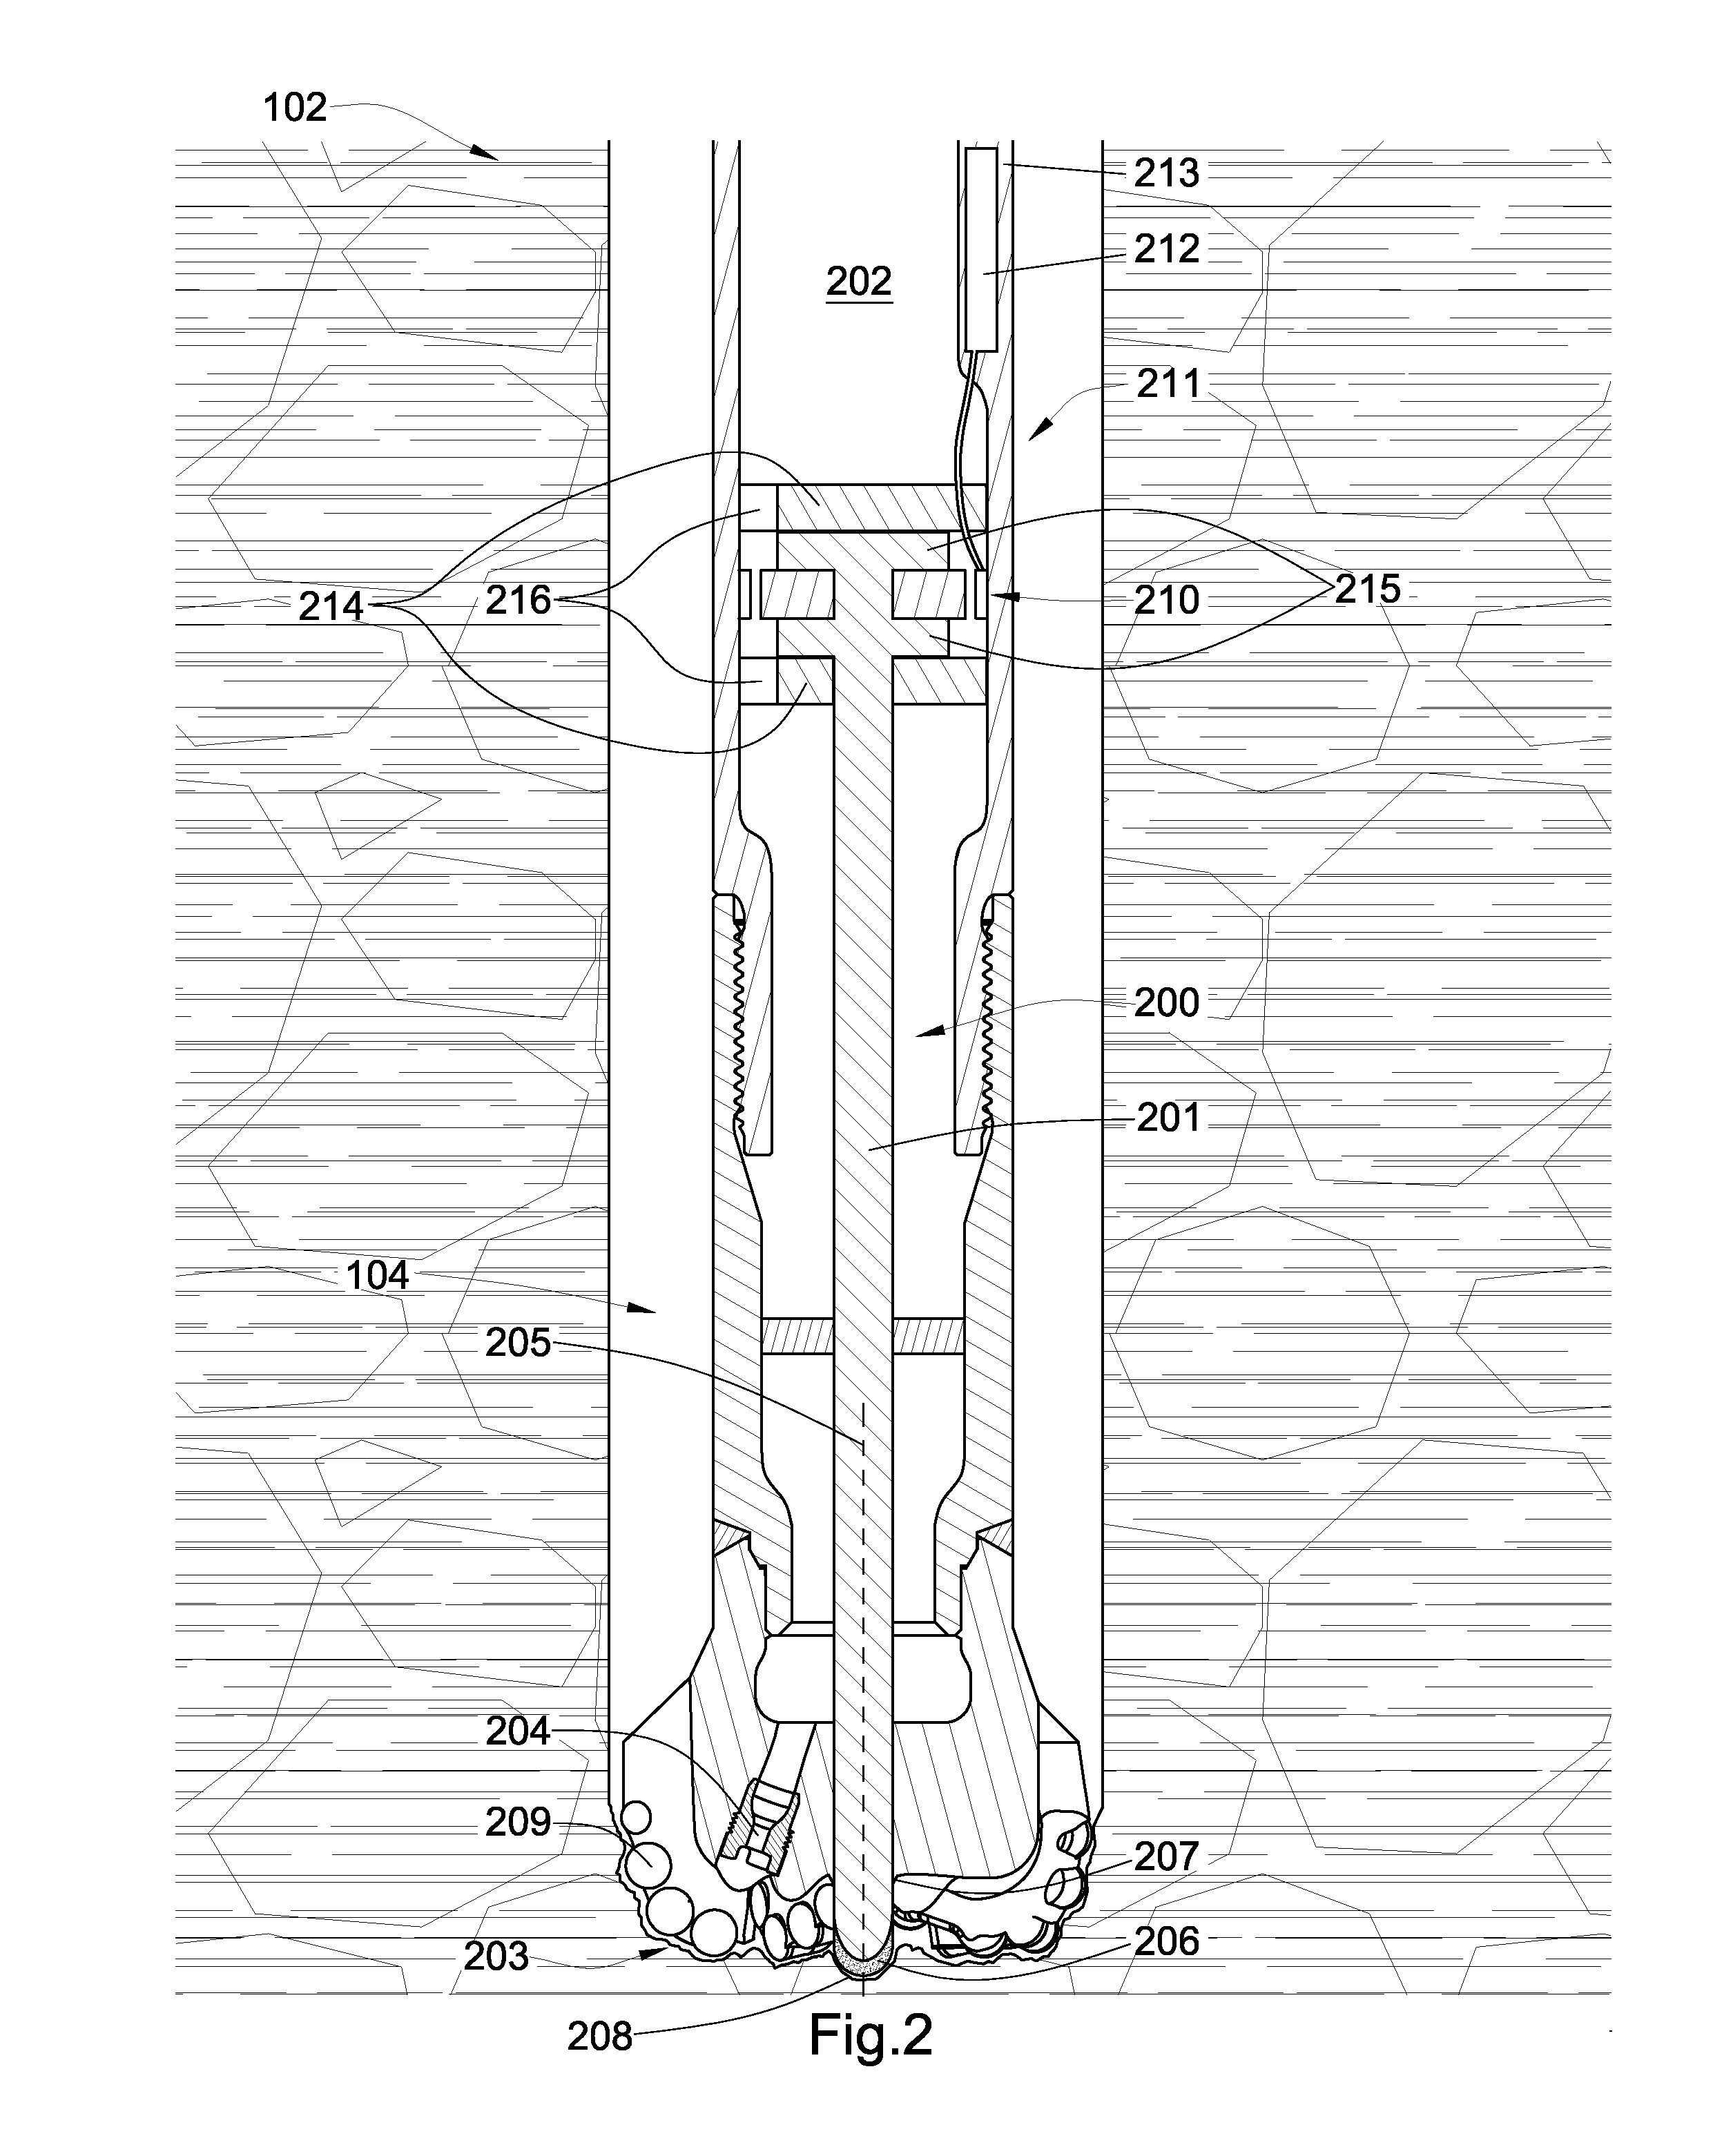 Jack Element in Communication with an Electric Motor and or Generator